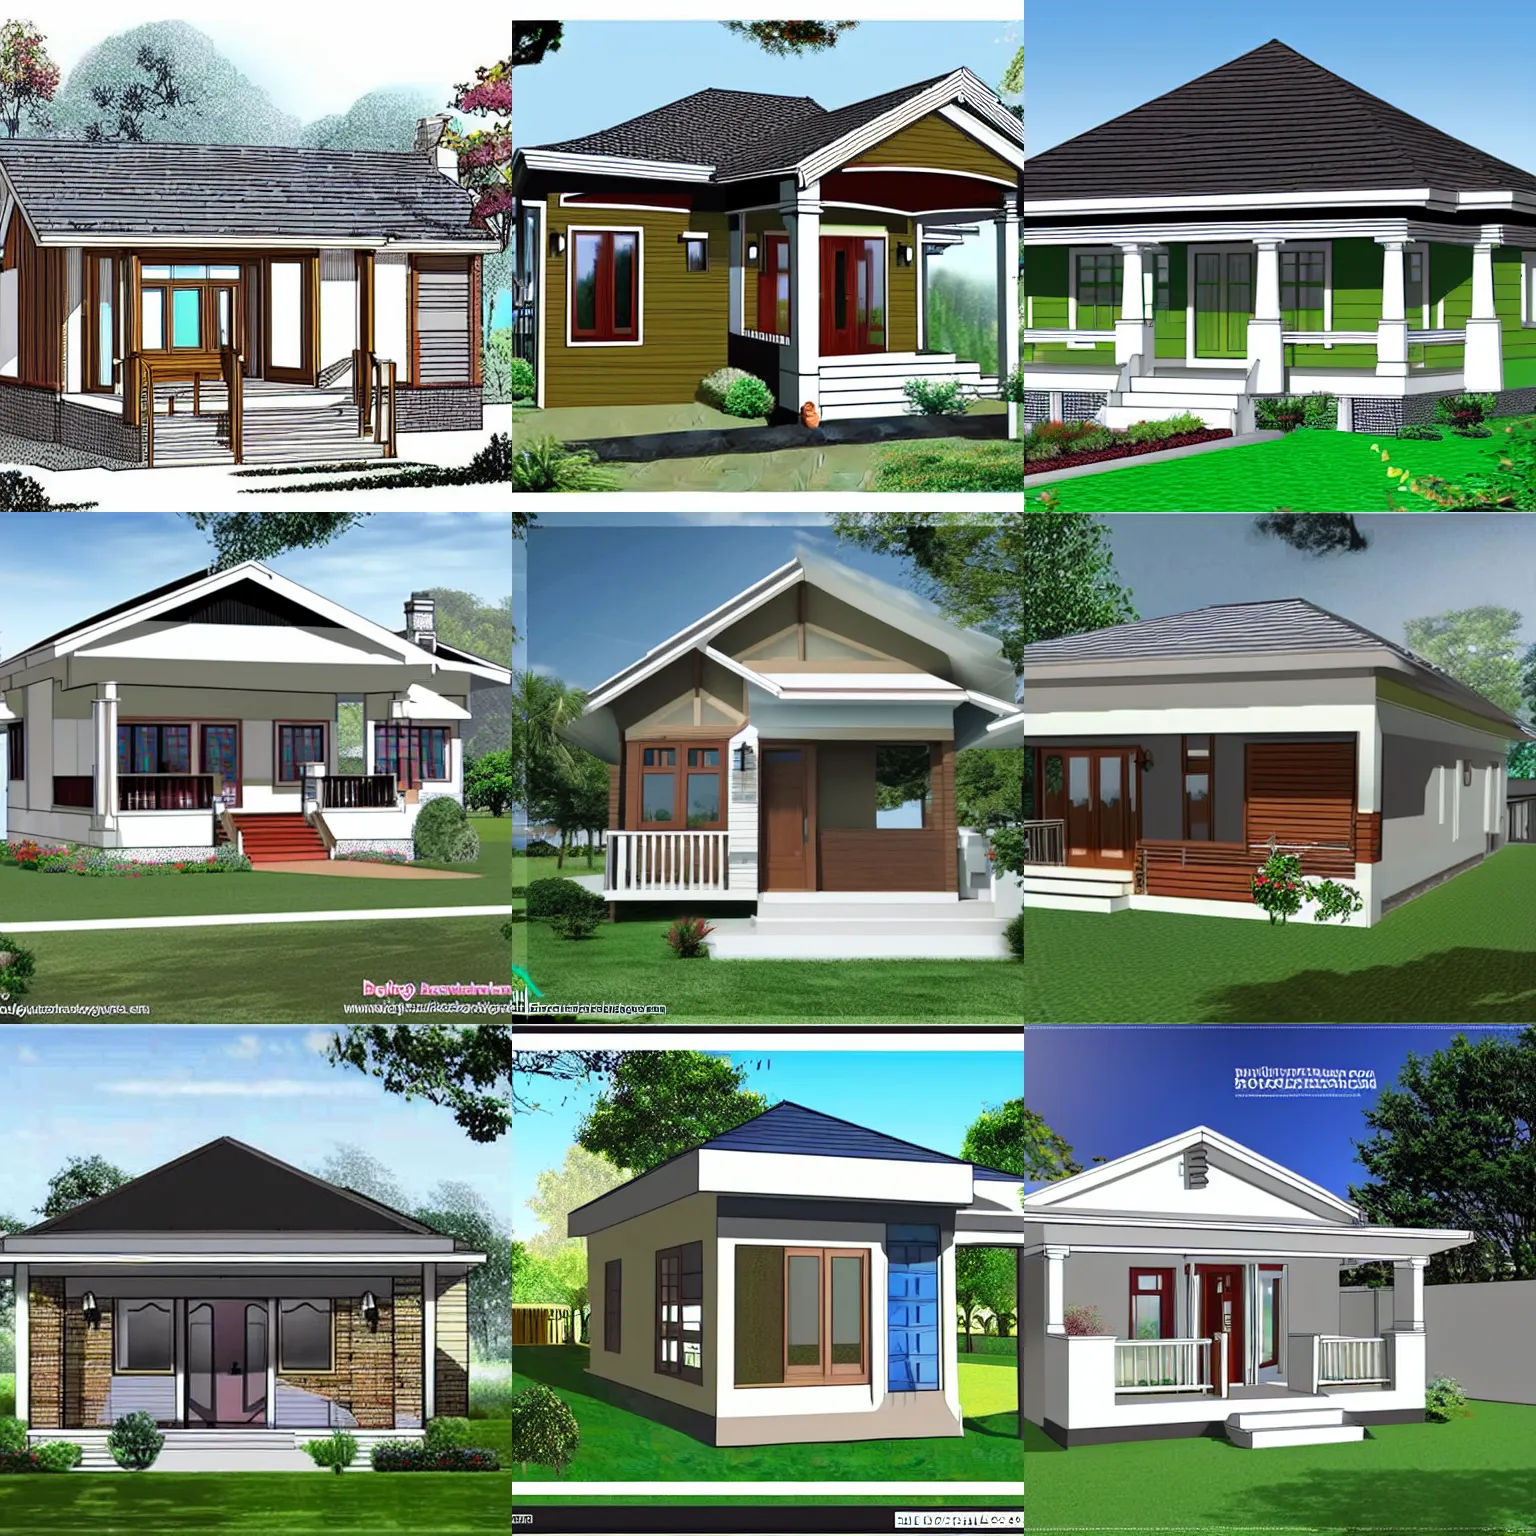 Prompt: Blueprint of a small bungalow with a full floor plan and elevations